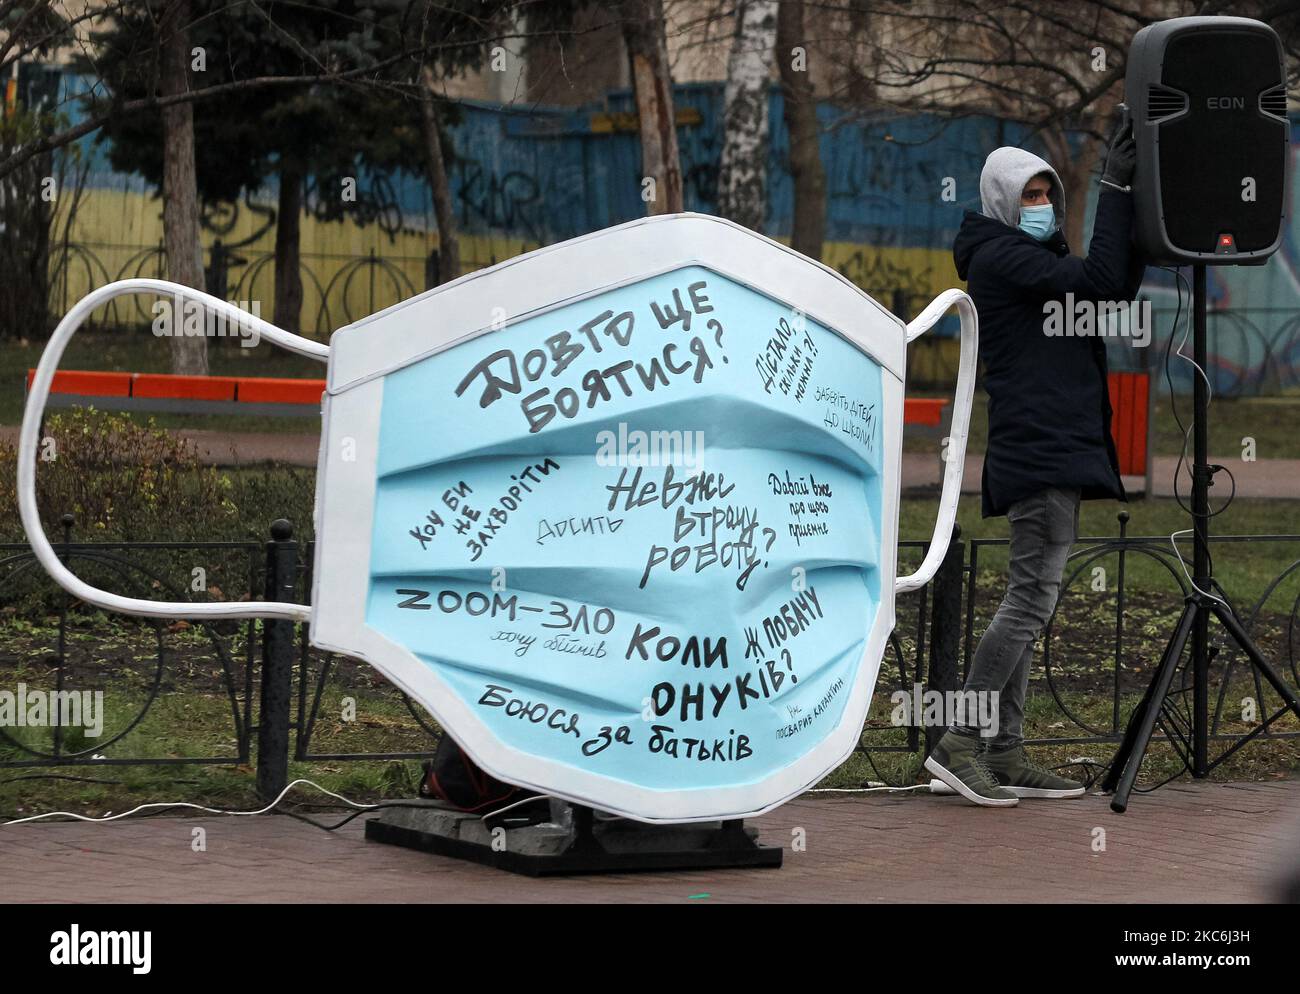 A man wearing a protective face mask amid the COVID-19 coronavirus epidemic stands next to an art-object of the largest medical mask in Ukraine during an event on Kontraktova Square in the center of Kyiv, Ukraine on 28 December 2020. The event named 'Cover yourself with a mask, not inside yourself' is a part of the social campaign aimed to draw attention to mental health problems during the Covid-19 coronavirus pandemic, as local media reported. The mask letterings like: 'If only not to get sick',' I'm afraid for my parents',' Will I really lose my job?','When will I see my grandchildren?', 'H Stock Photo